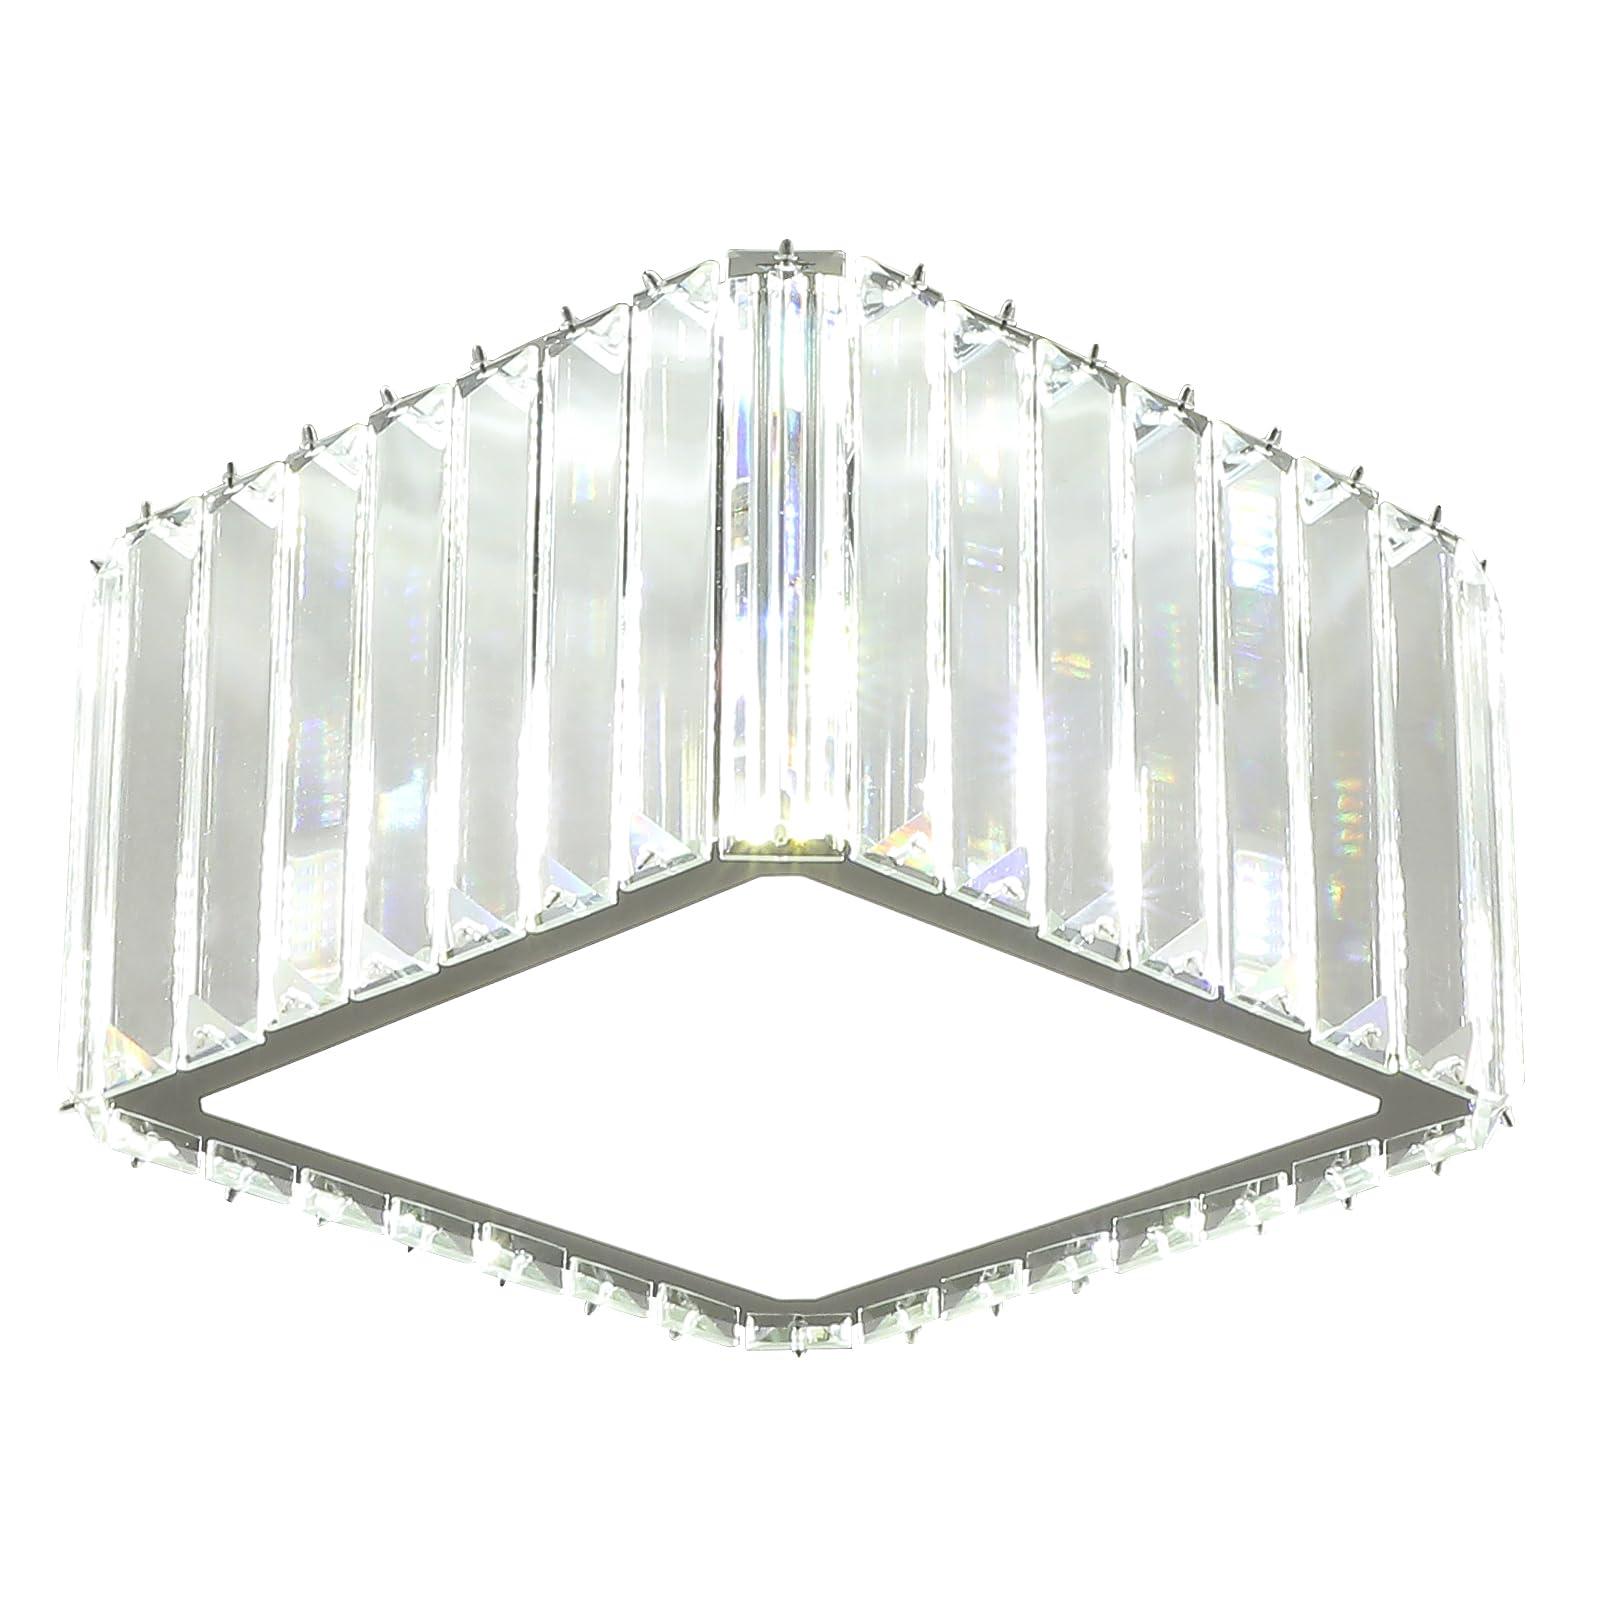 FORCOSO Crystal Light Shade Ceiling Chrome Ø22cm Squre 3 Lights